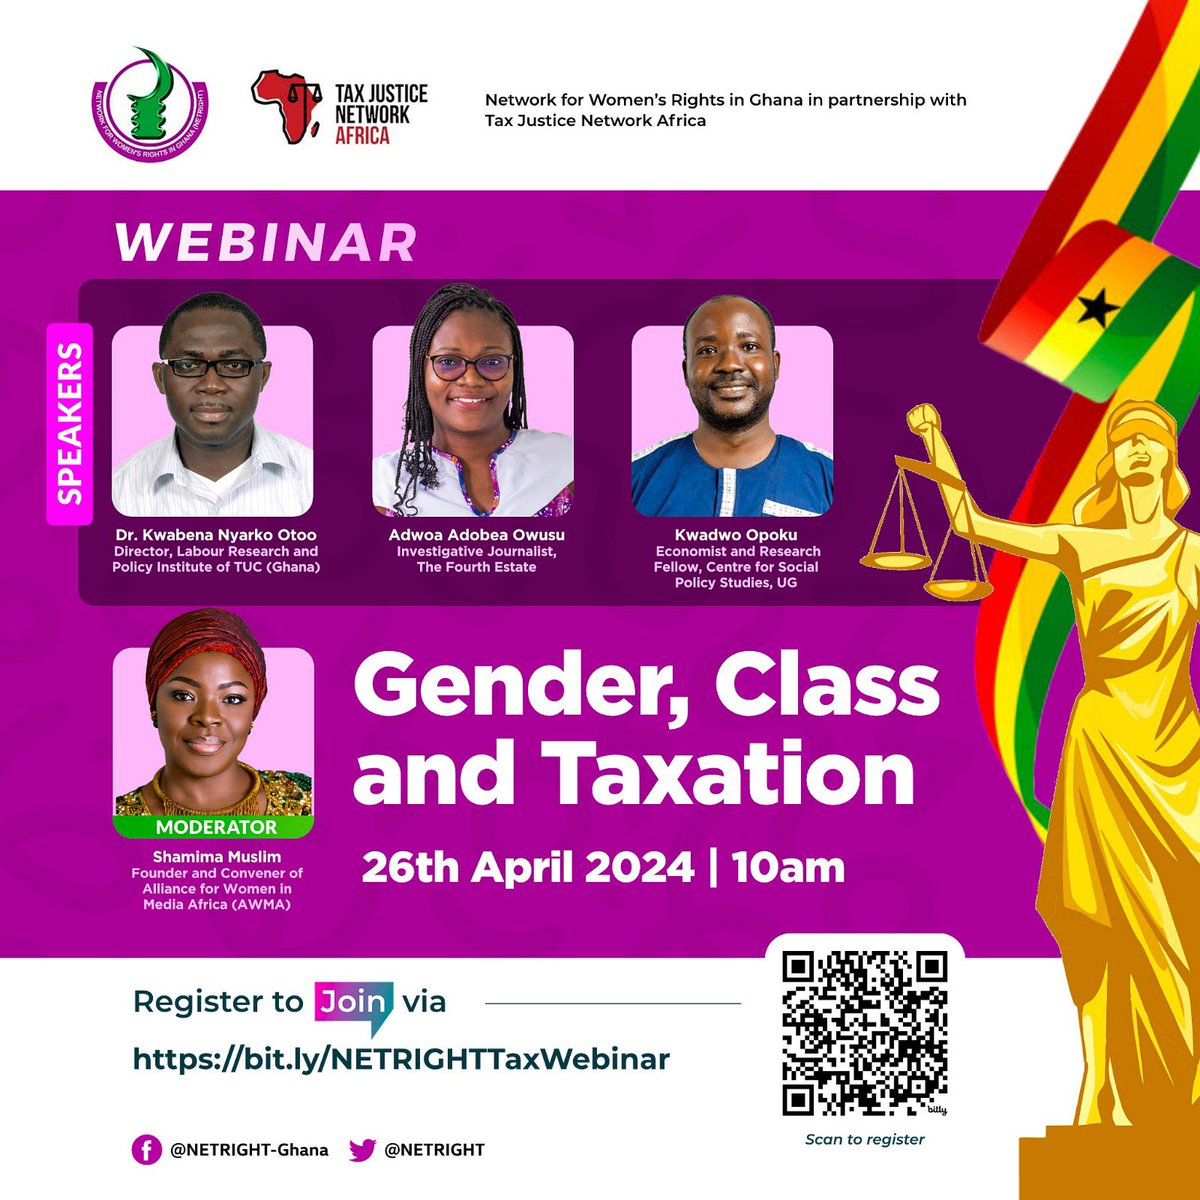 Did you know that there are gendered and class dimensions in our tax system? Well, join @NETRIGHT for this important webinar at 10am today. Kindly scan the code for the link.